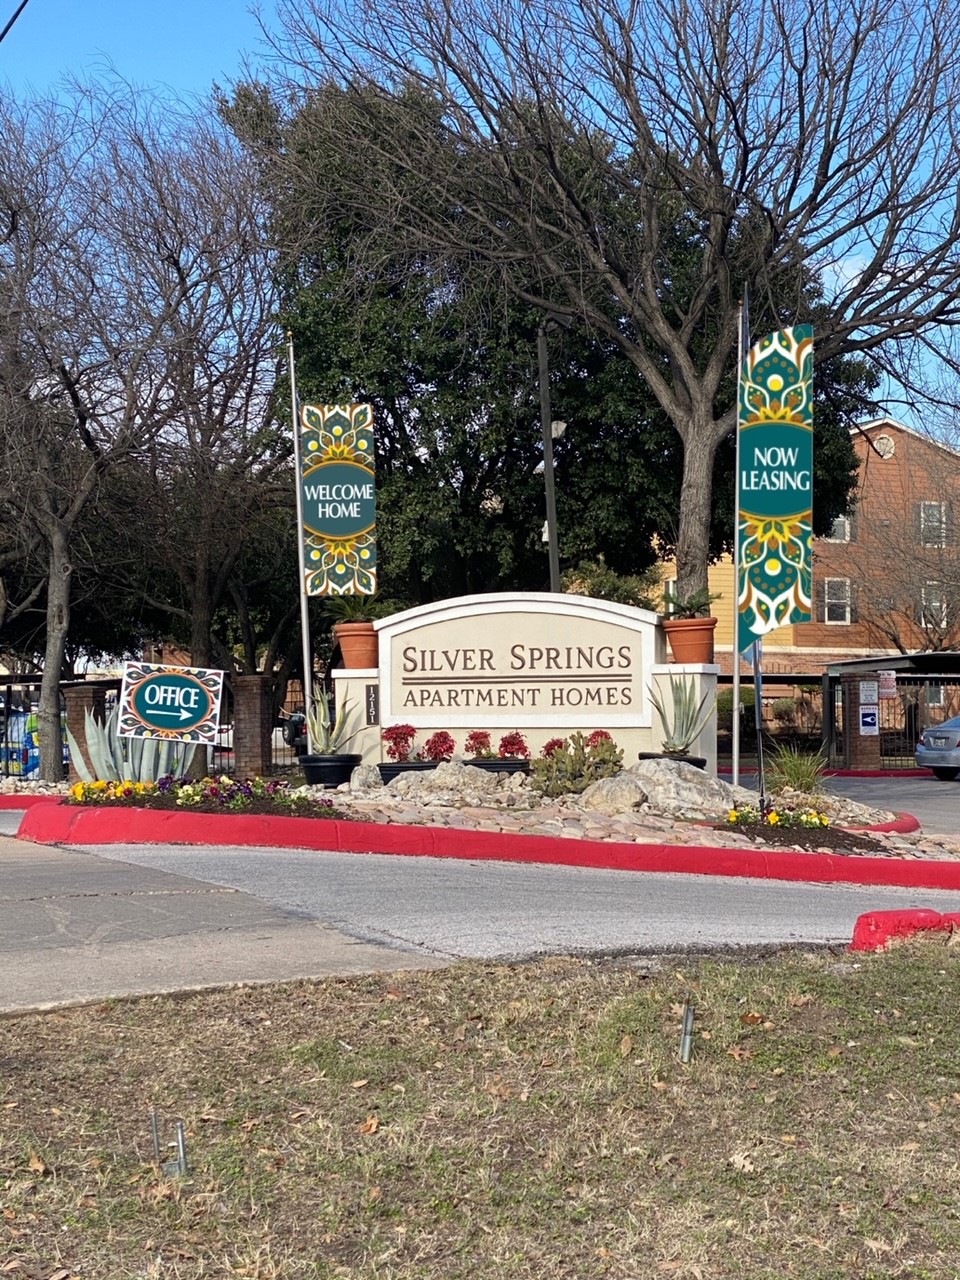 Photo of SILVER SPRINGS APTS at 12151 N INTERSTATE 35 AUSTIN, TX 78753